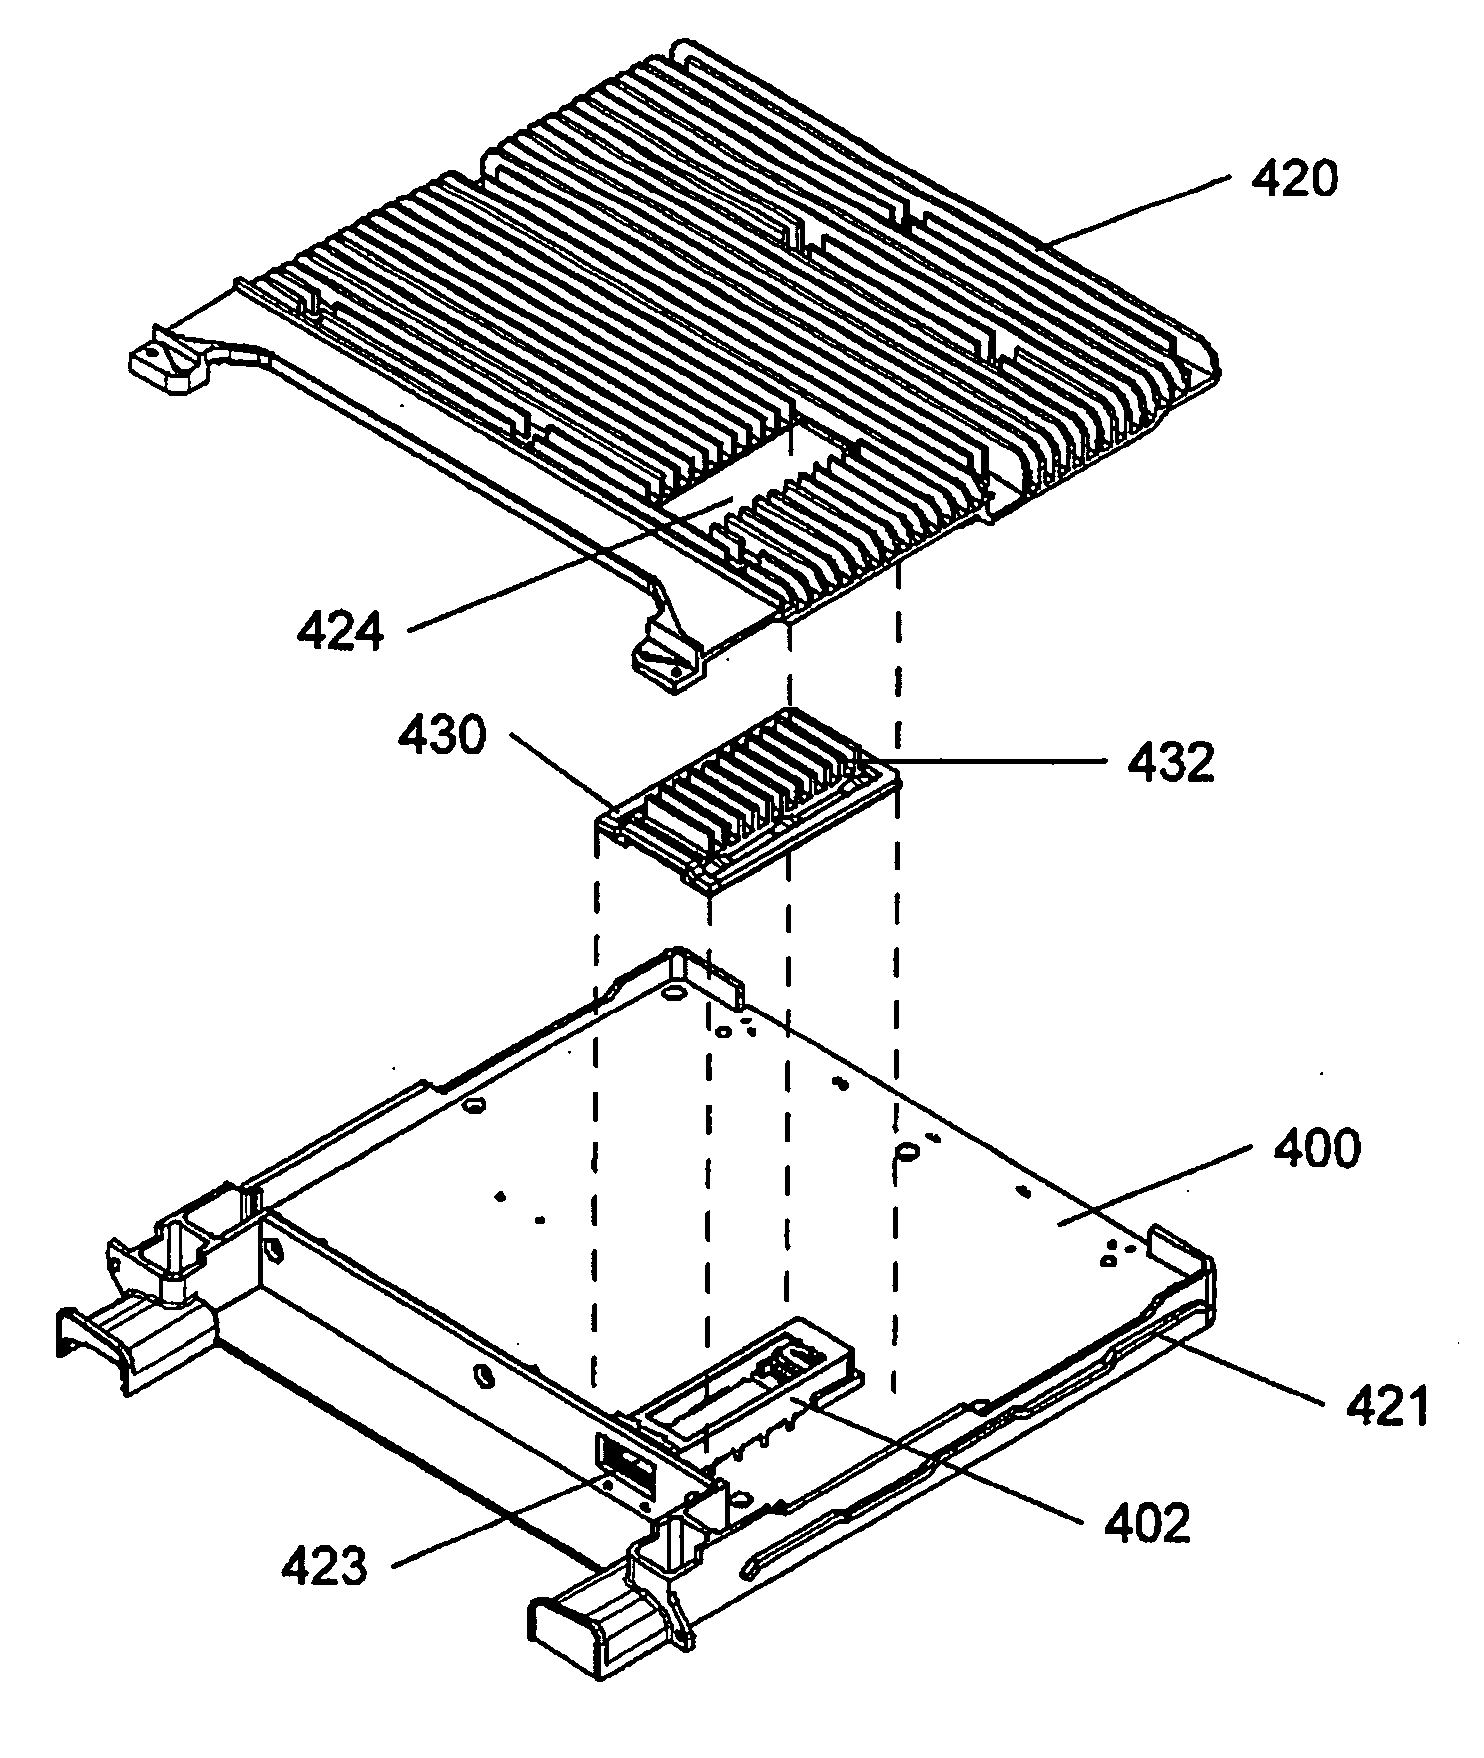 Floating heatsink for removable components